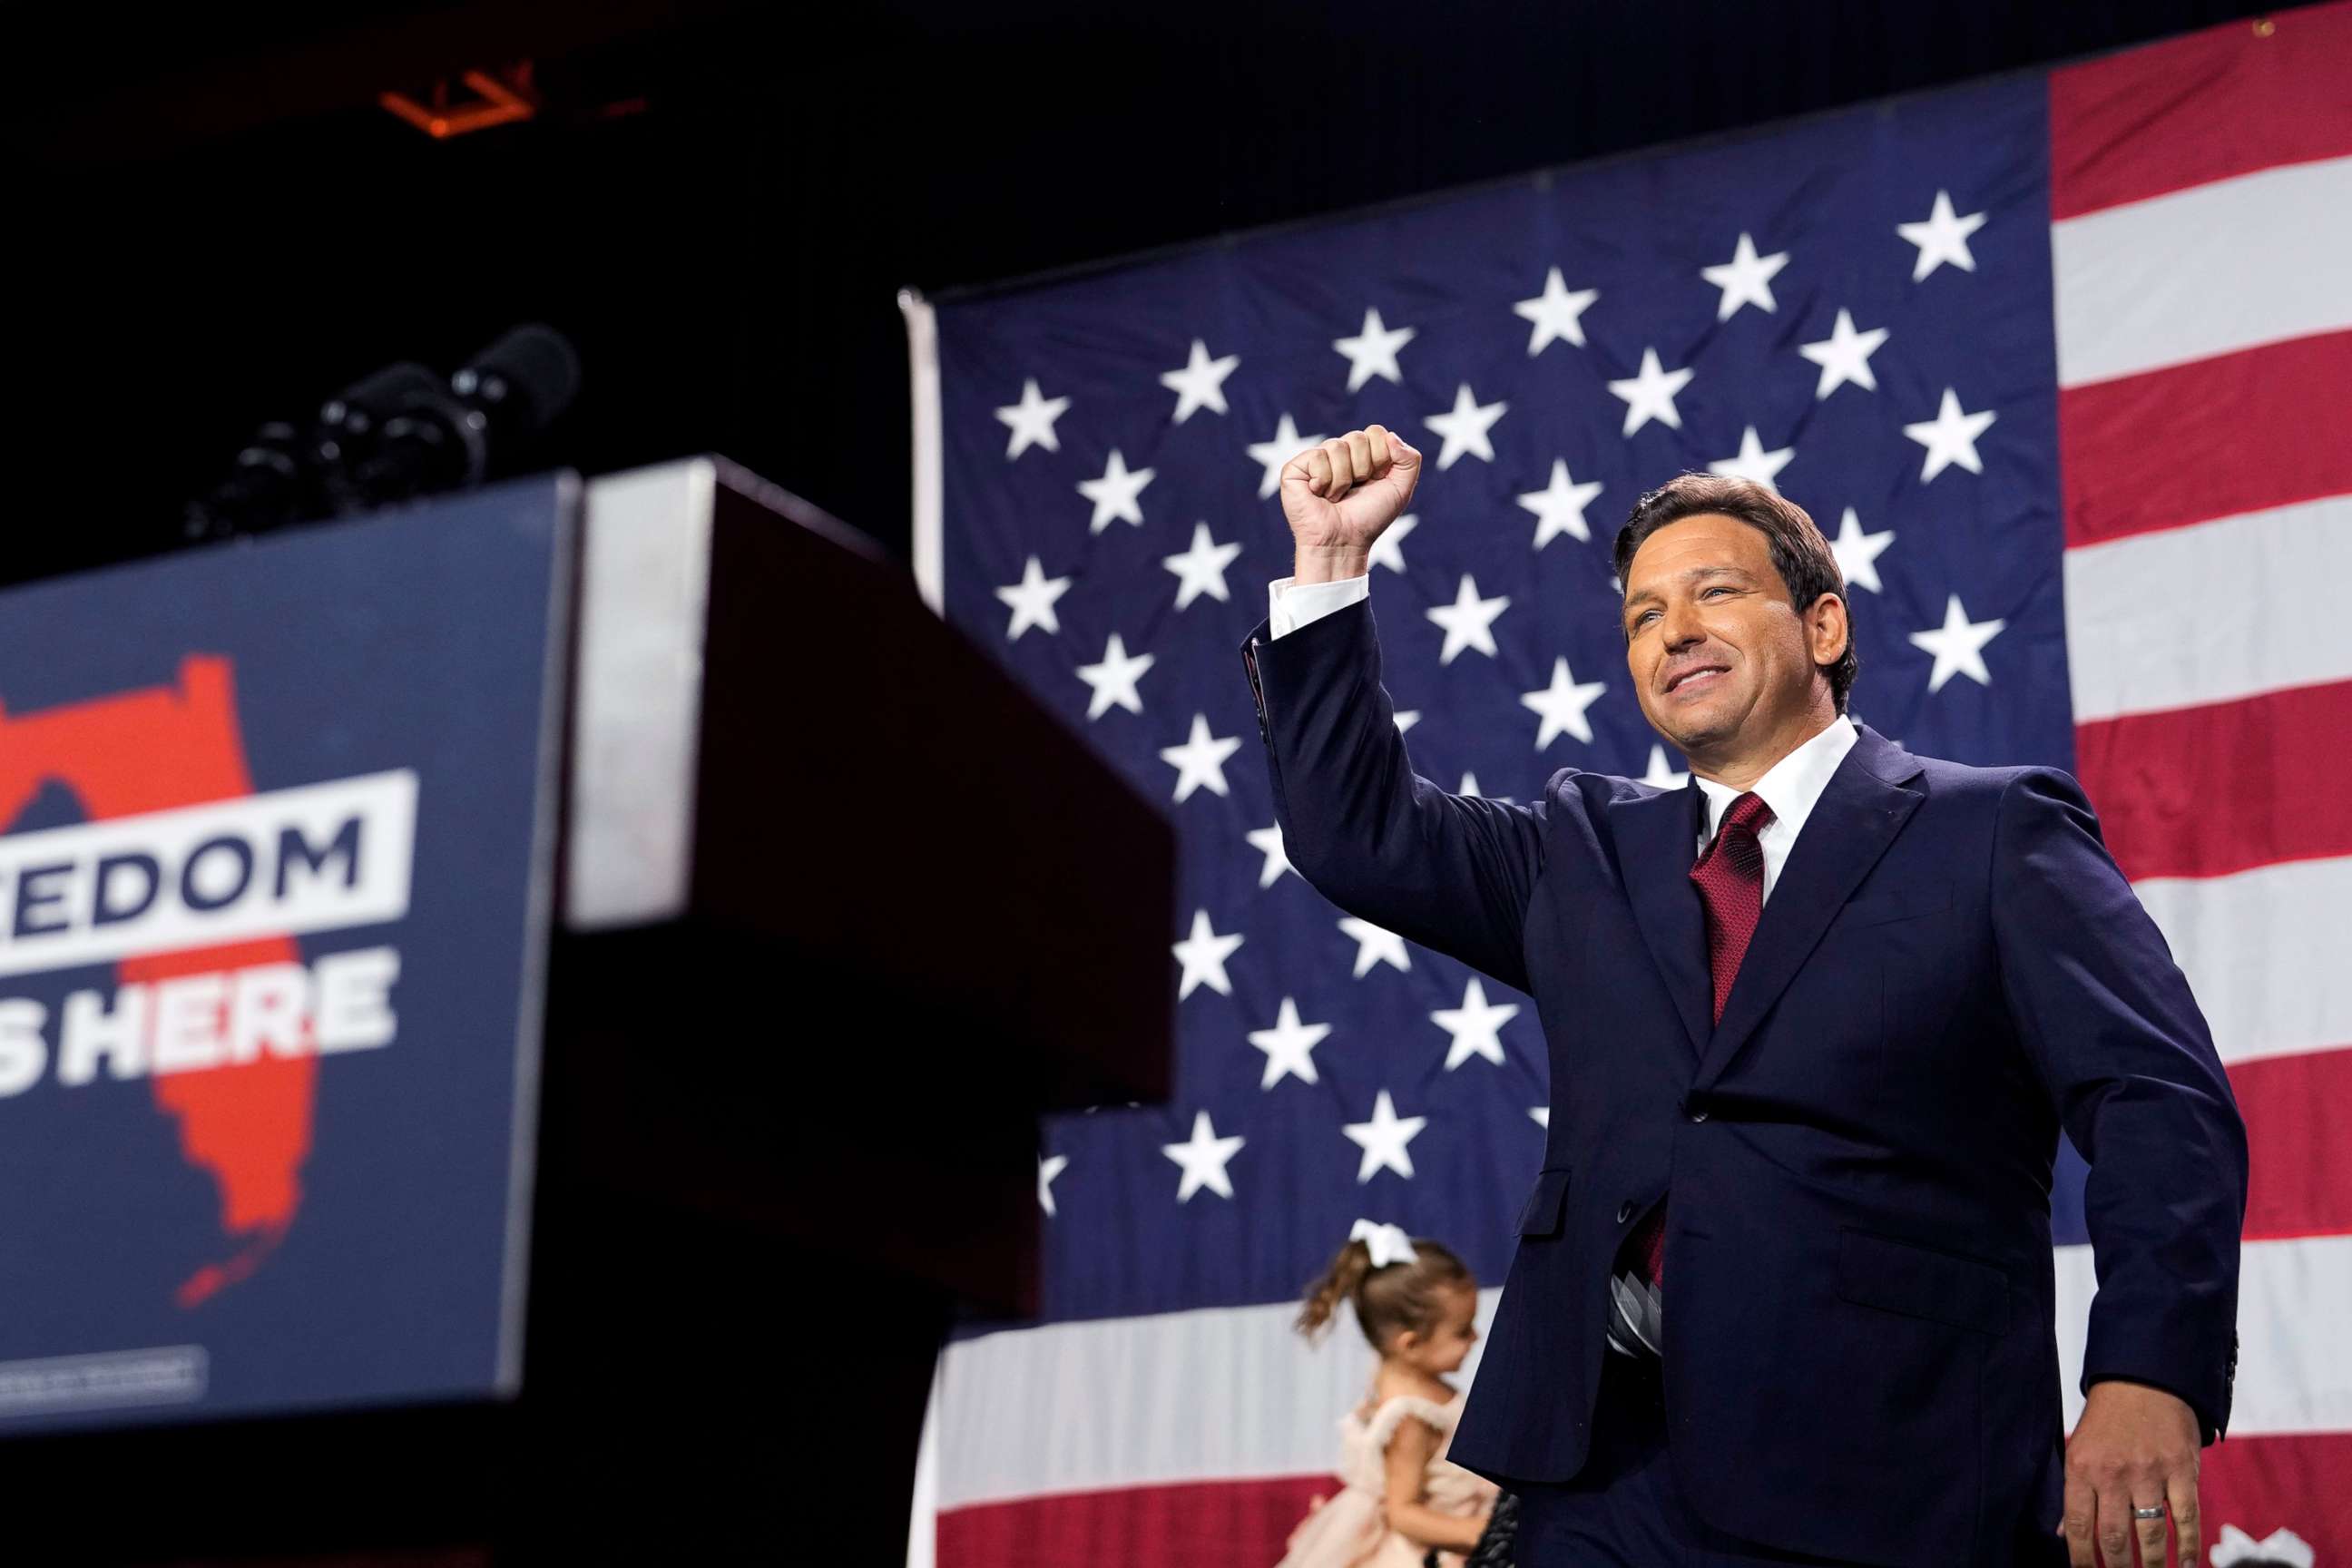 PHOTO: Incumbent Florida Republican Gov. Ron DeSantis arrives to speak to supporters at an election night party after winning his race for reelection in Tampa, Fla., Nov. 8, 2022.